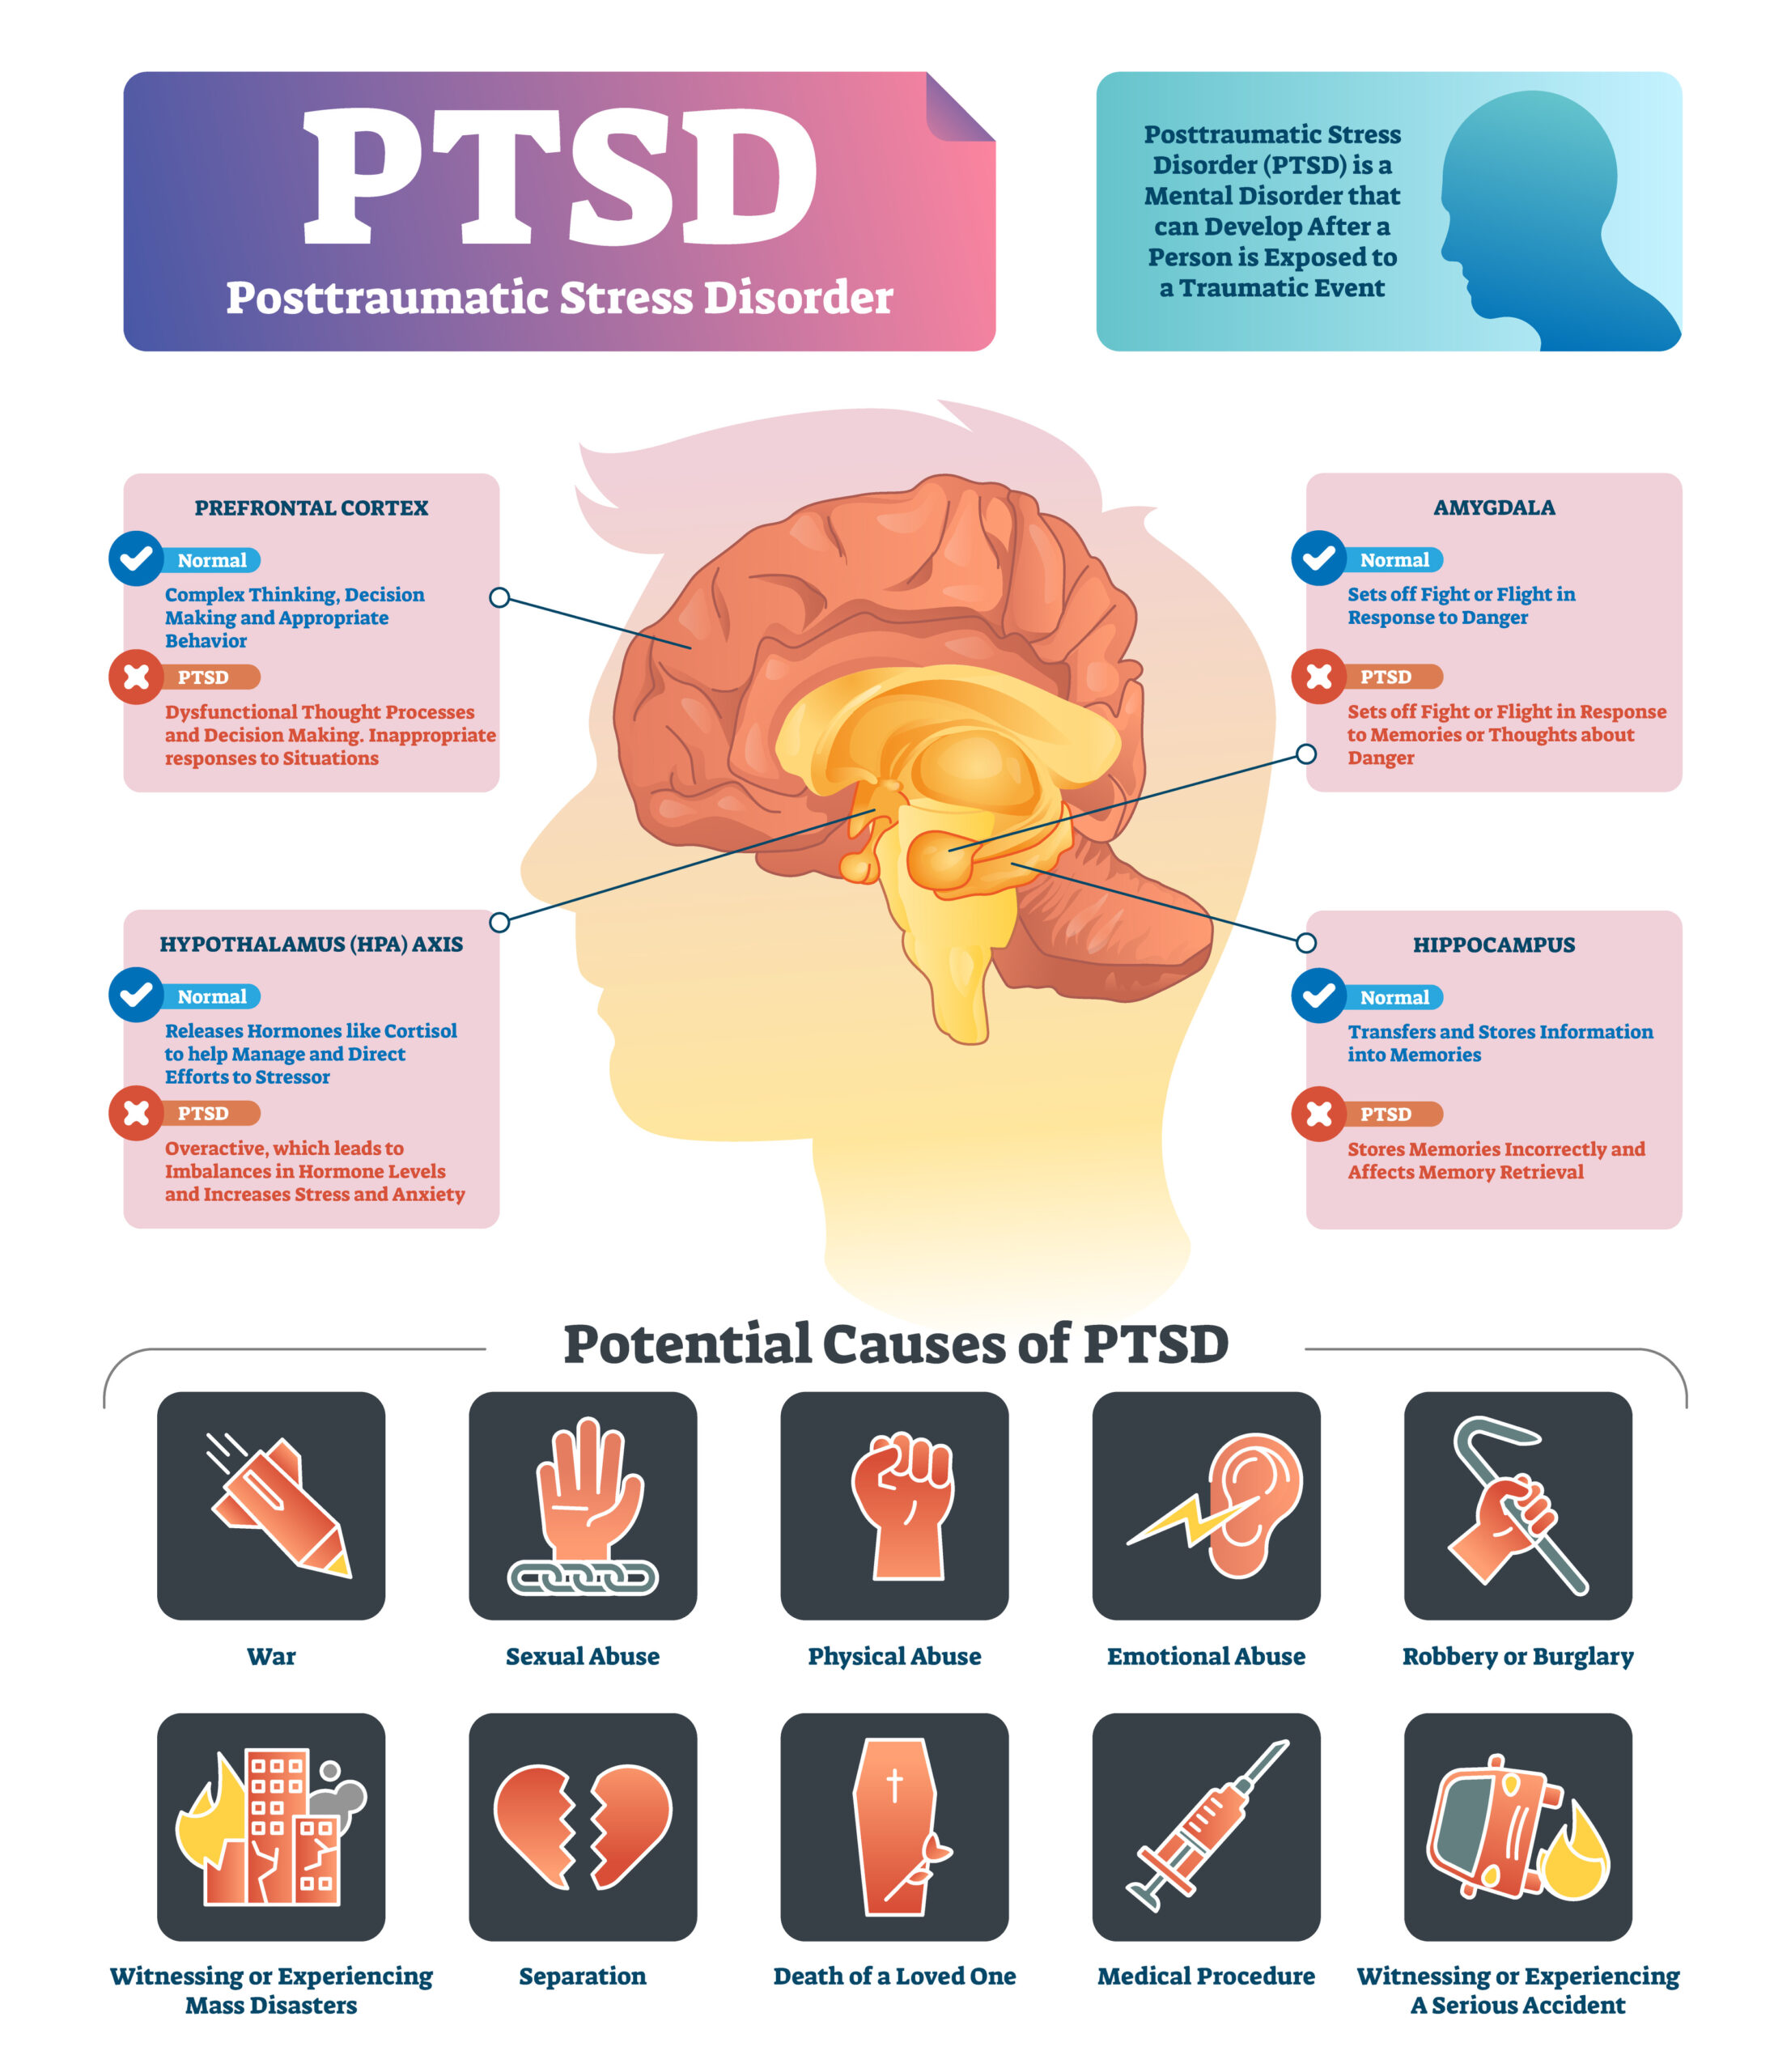 Illustration highlighting different areas of the brain the disease affects as well as potential causes of PTSD.